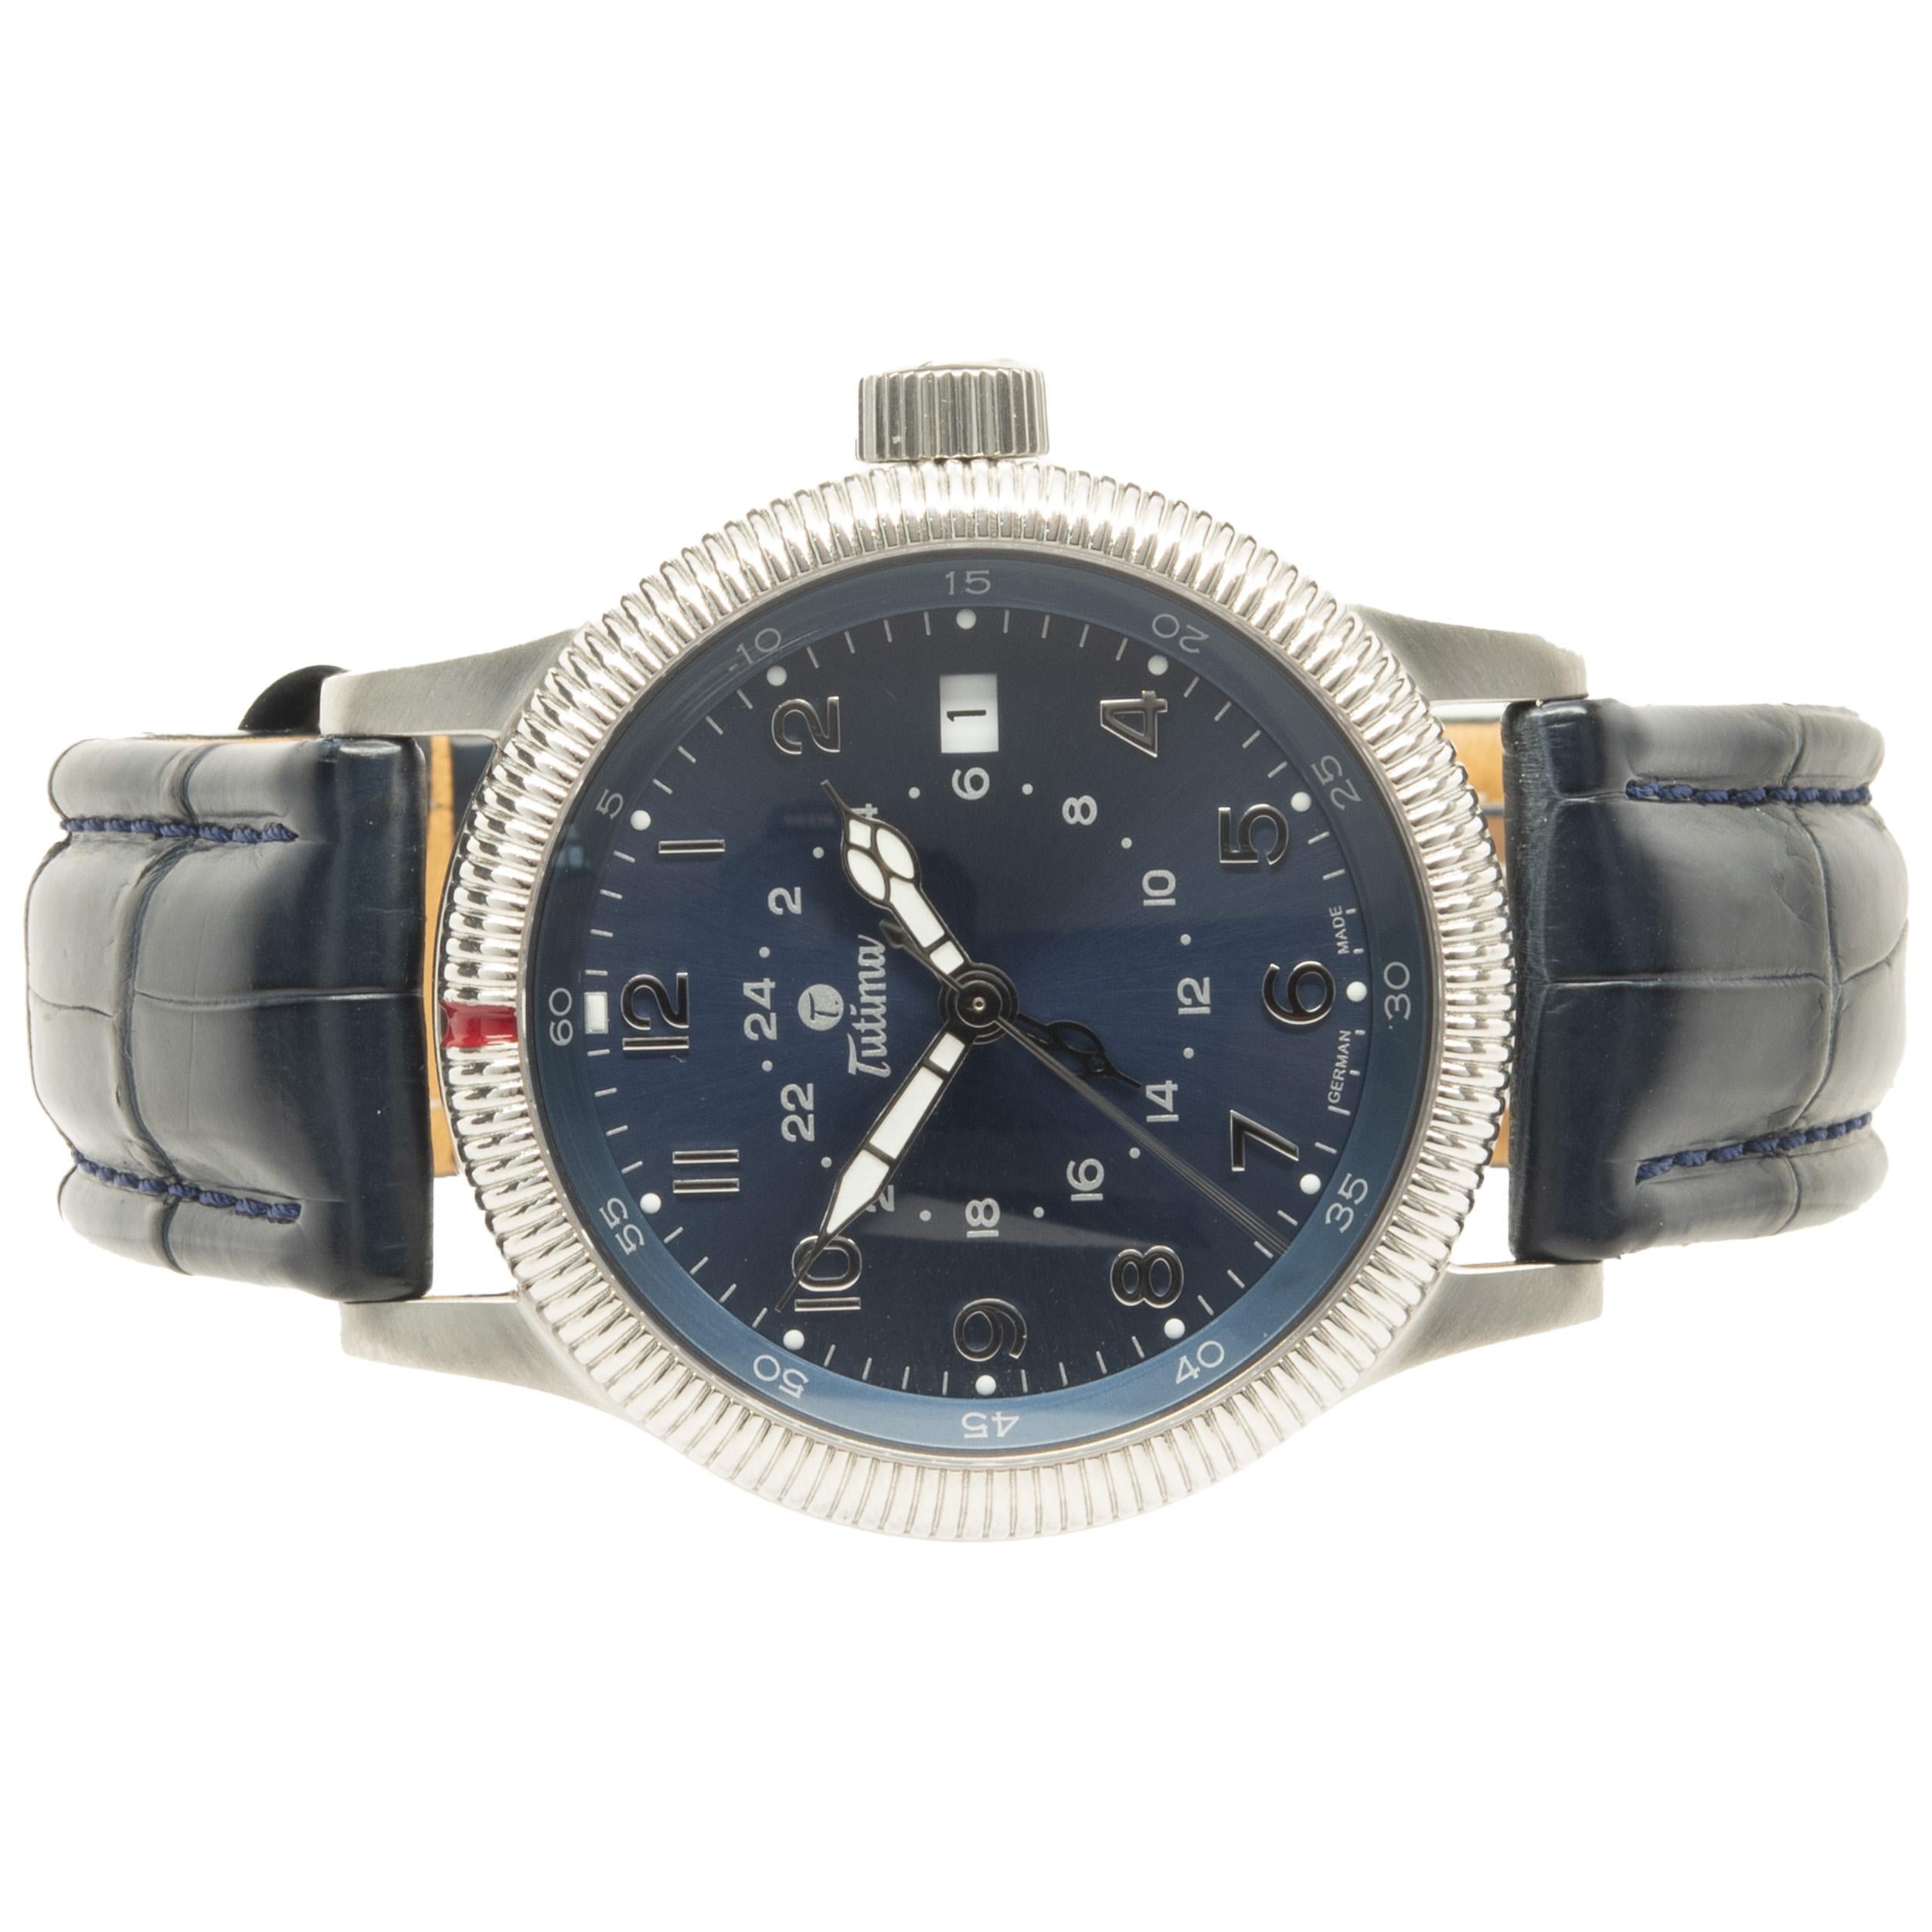 Movement: automatic
Function: hours, minutes, seconds, date, chronograph
Case: 36.5mm round steel case, sapphire crystal, push/pull crown
Bracelet: blue alligator leather, integrated clasp
Dial: blue arabic
Reference # Flieger GMT
Serial # 635